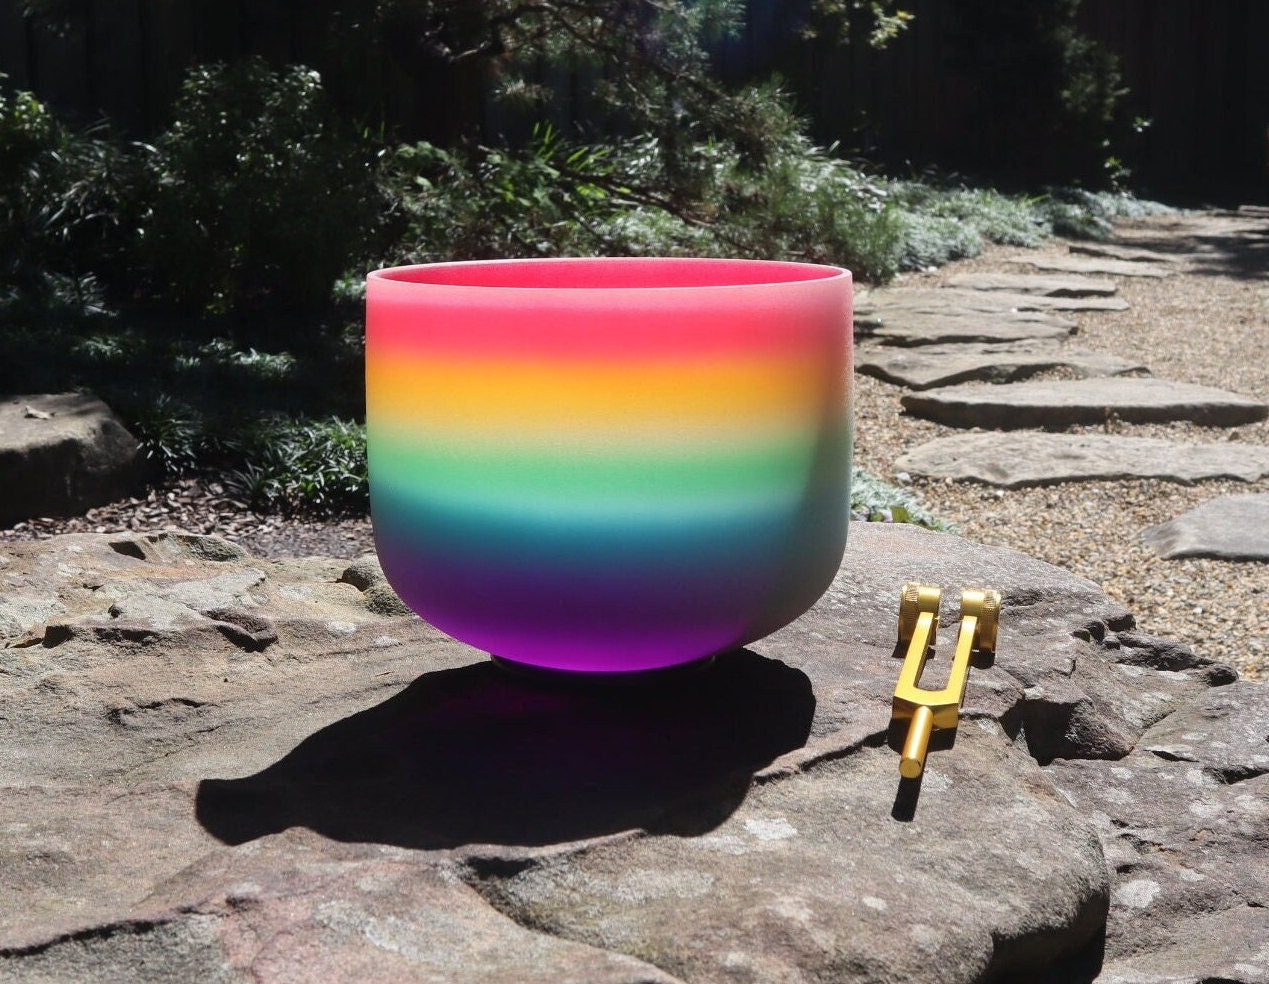 528 Hz Rainbow - 8” Crystal Singing Bowl And 174 Hz Solfeggio Tuning Fork - 99% Quartz Crystal, Mallet, With Padded Carry Case